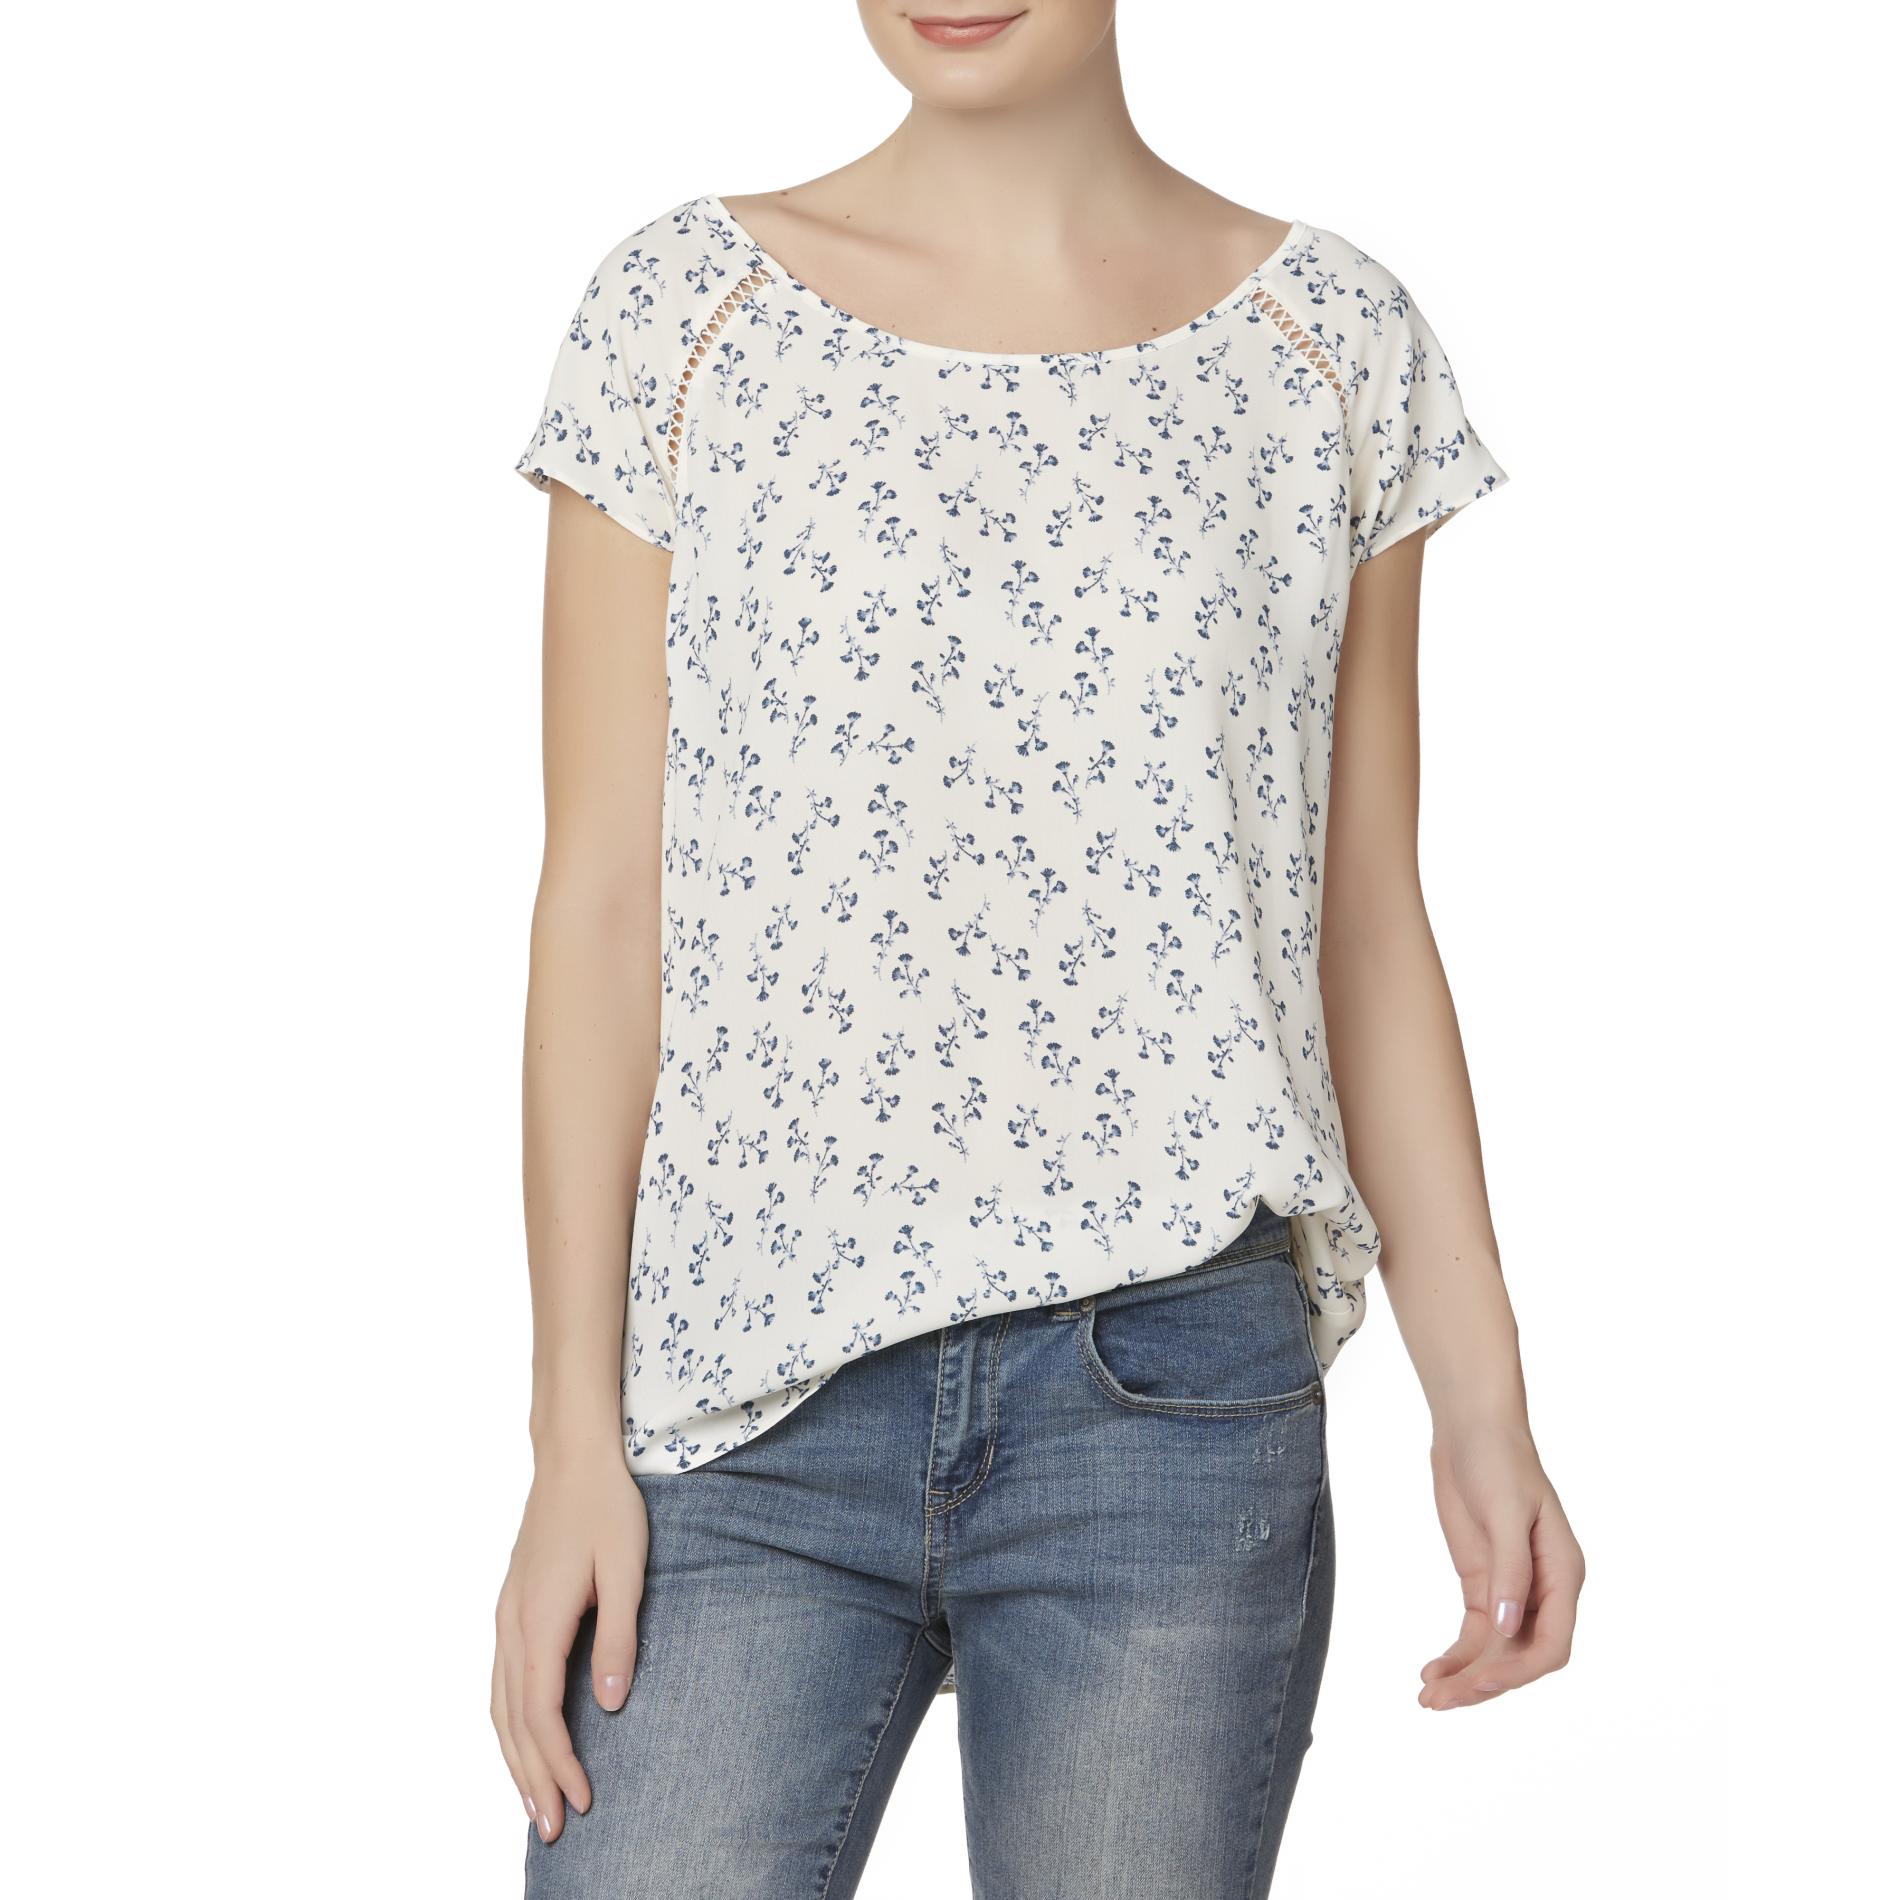 Simply Styled Women's Printed Top - Floral